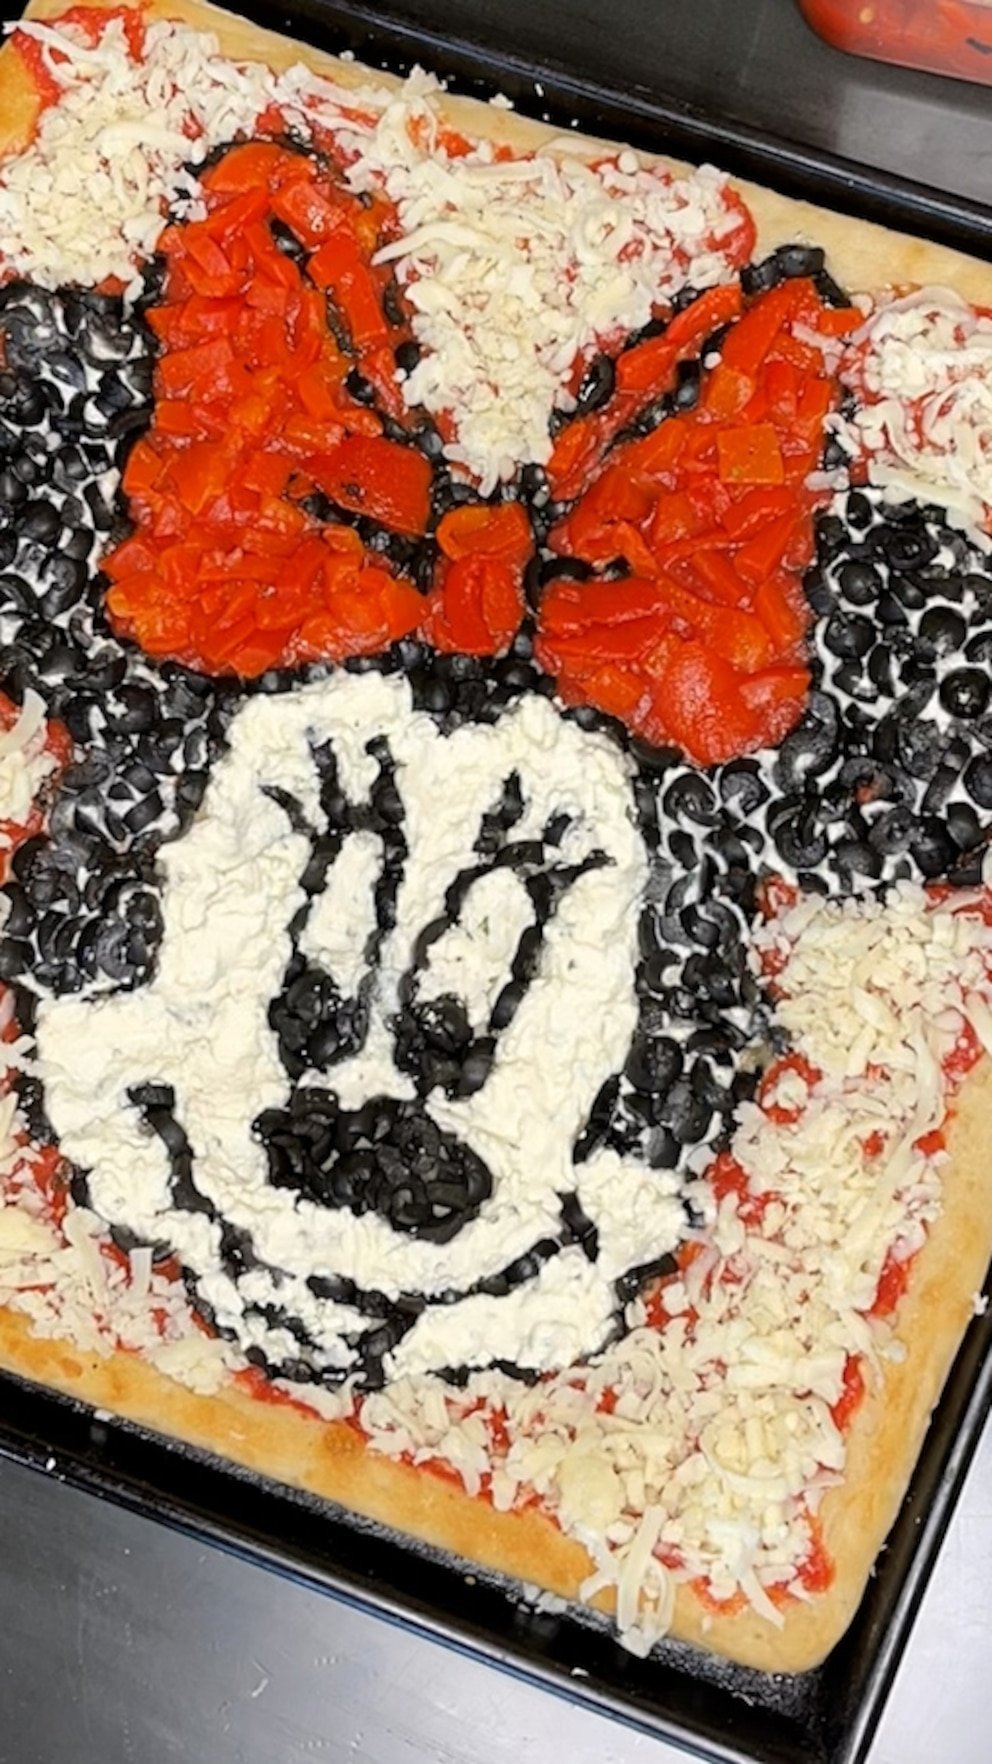 WATCH: Restaurant creates pizzas topped with iconic Disney characters